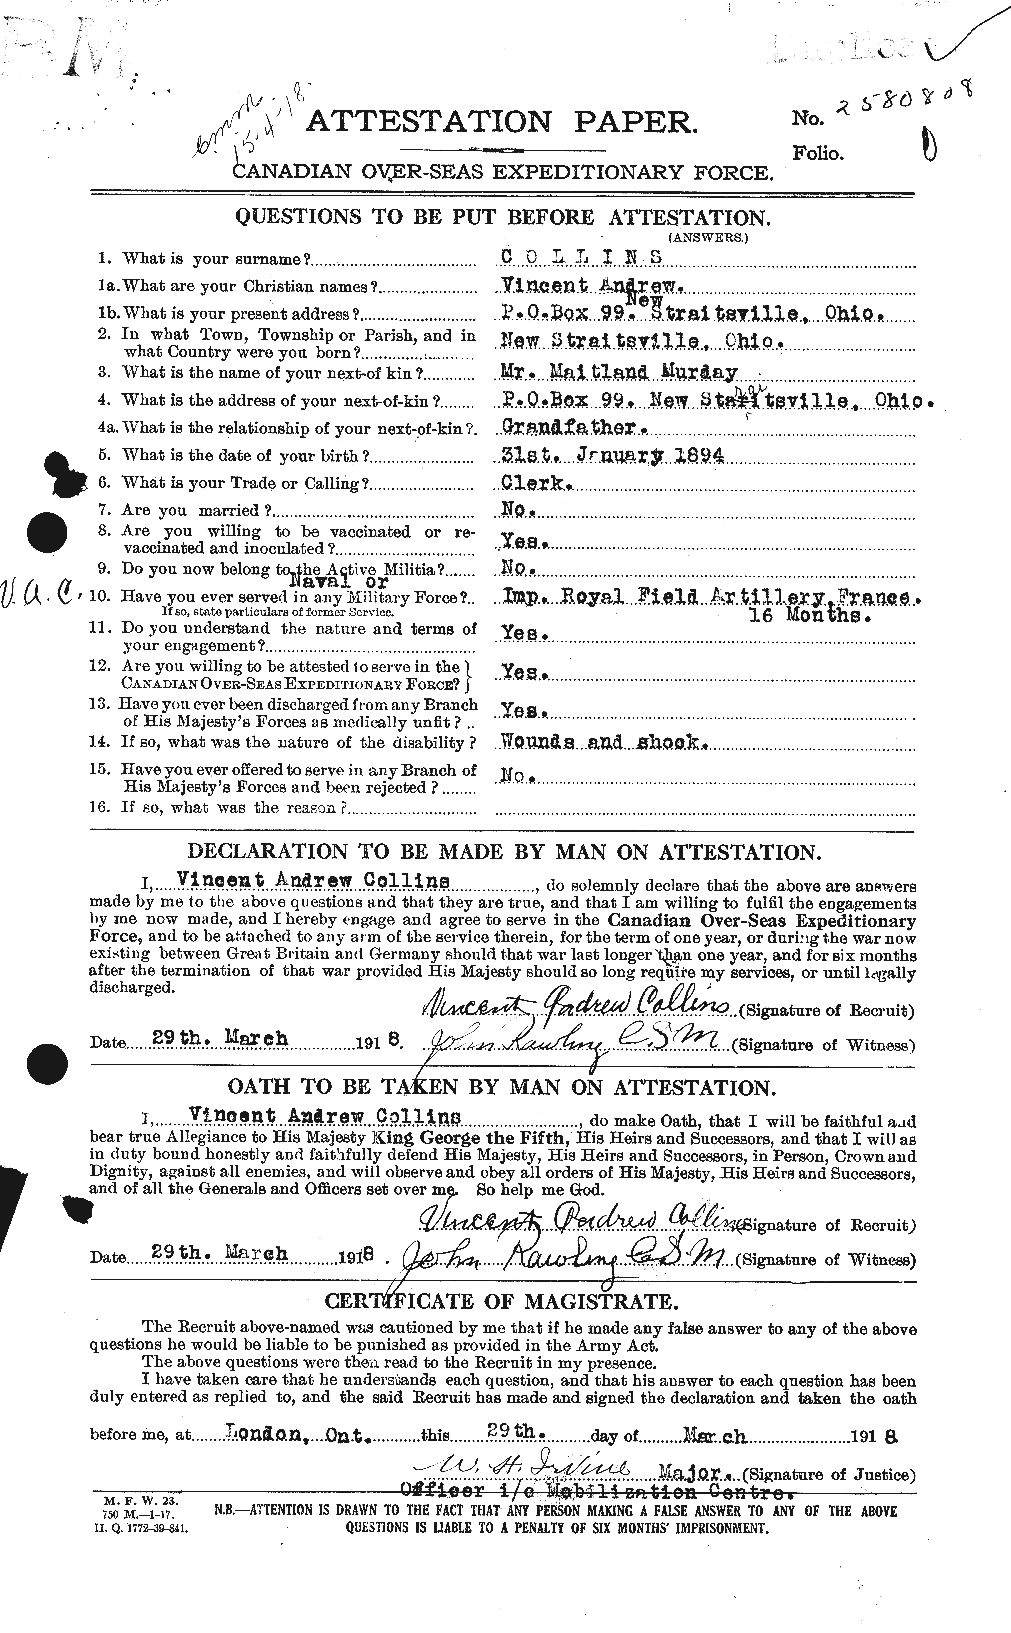 Personnel Records of the First World War - CEF 068839a